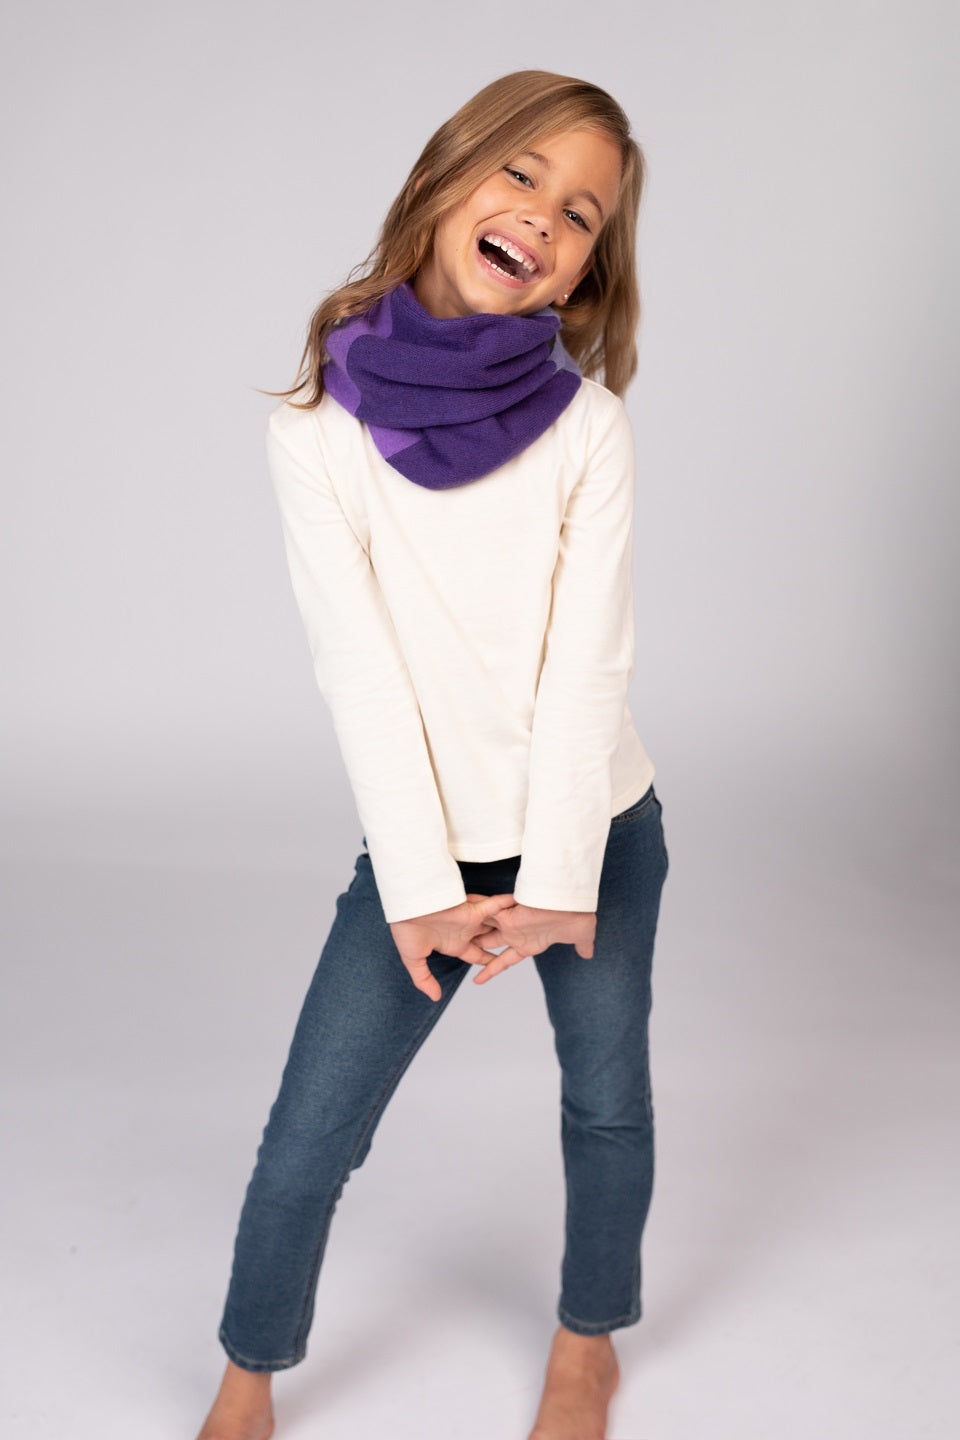 Purple and Lavender - Cashmere Infinity Scarf for Kids